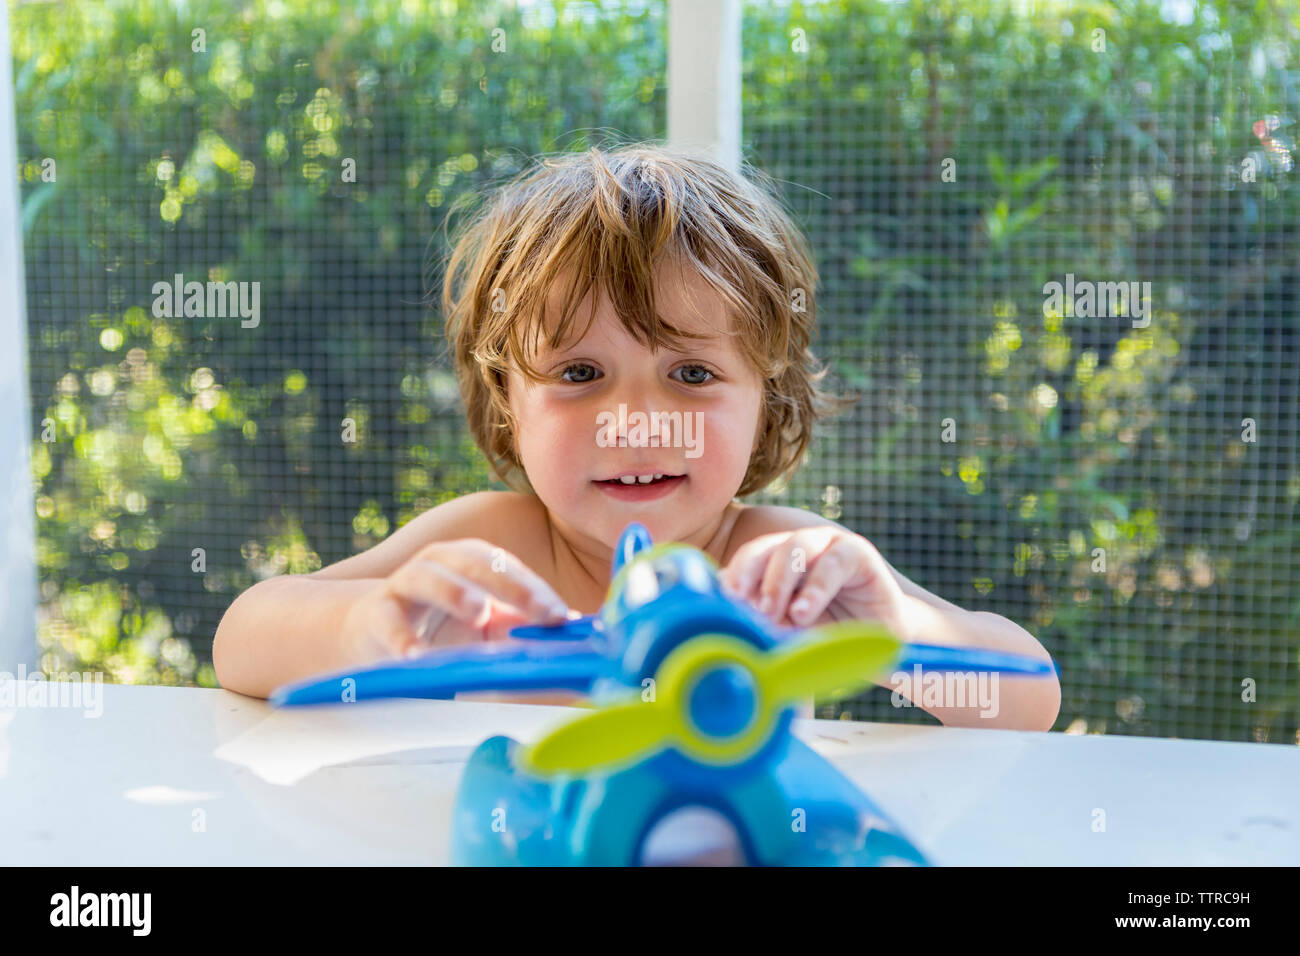 Cute child playing with toy at home Stock Photo